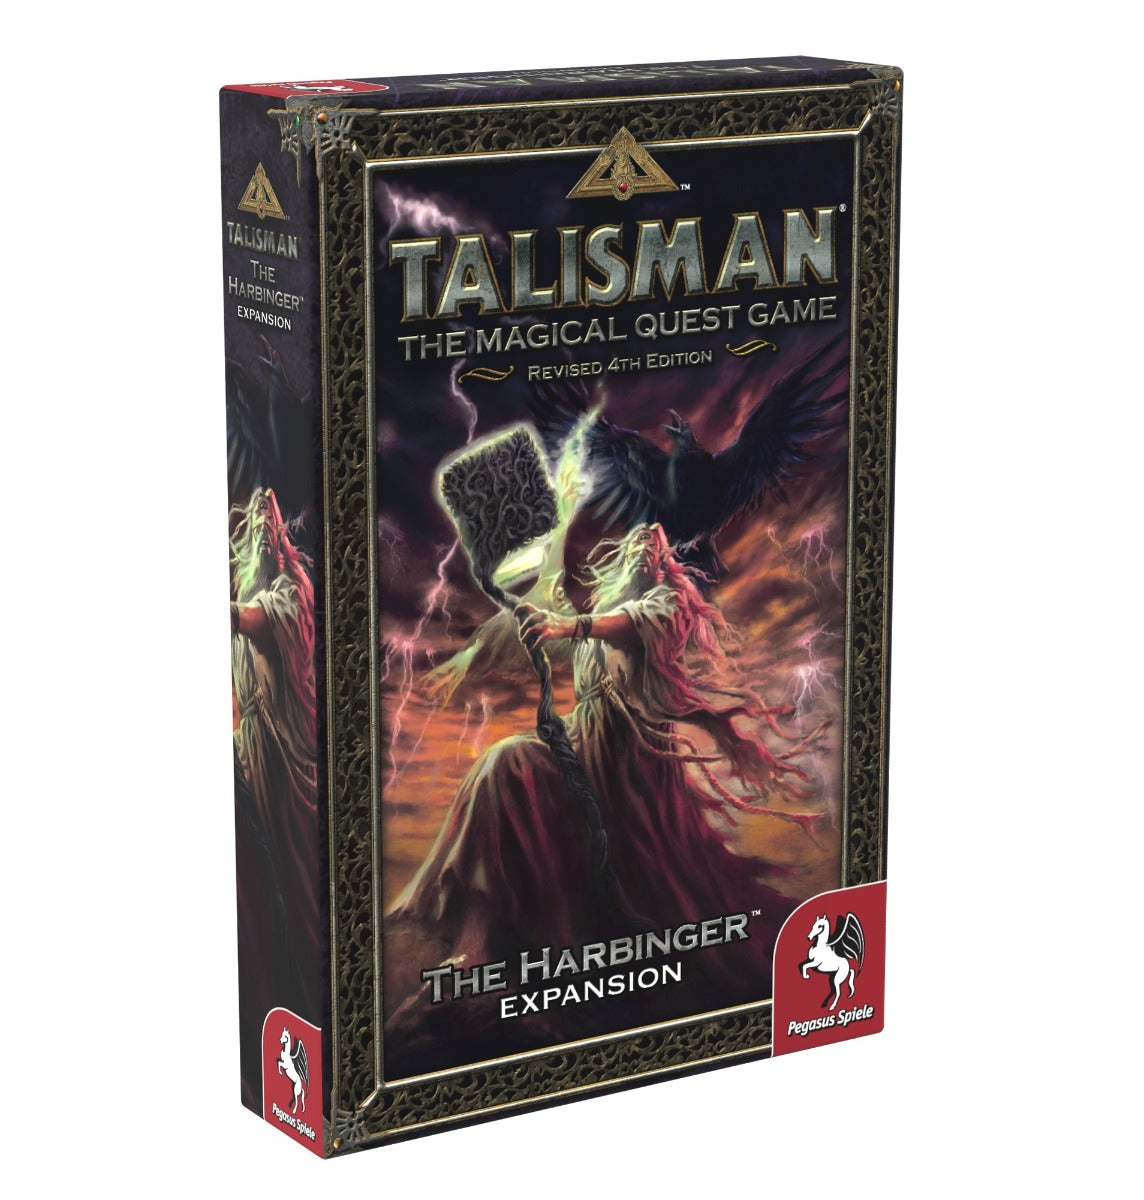 Talisman Revised 4th Edition, The Magical Quest Game, Expansion, Udvidelse, The Harbinger, Pegasus Spiele